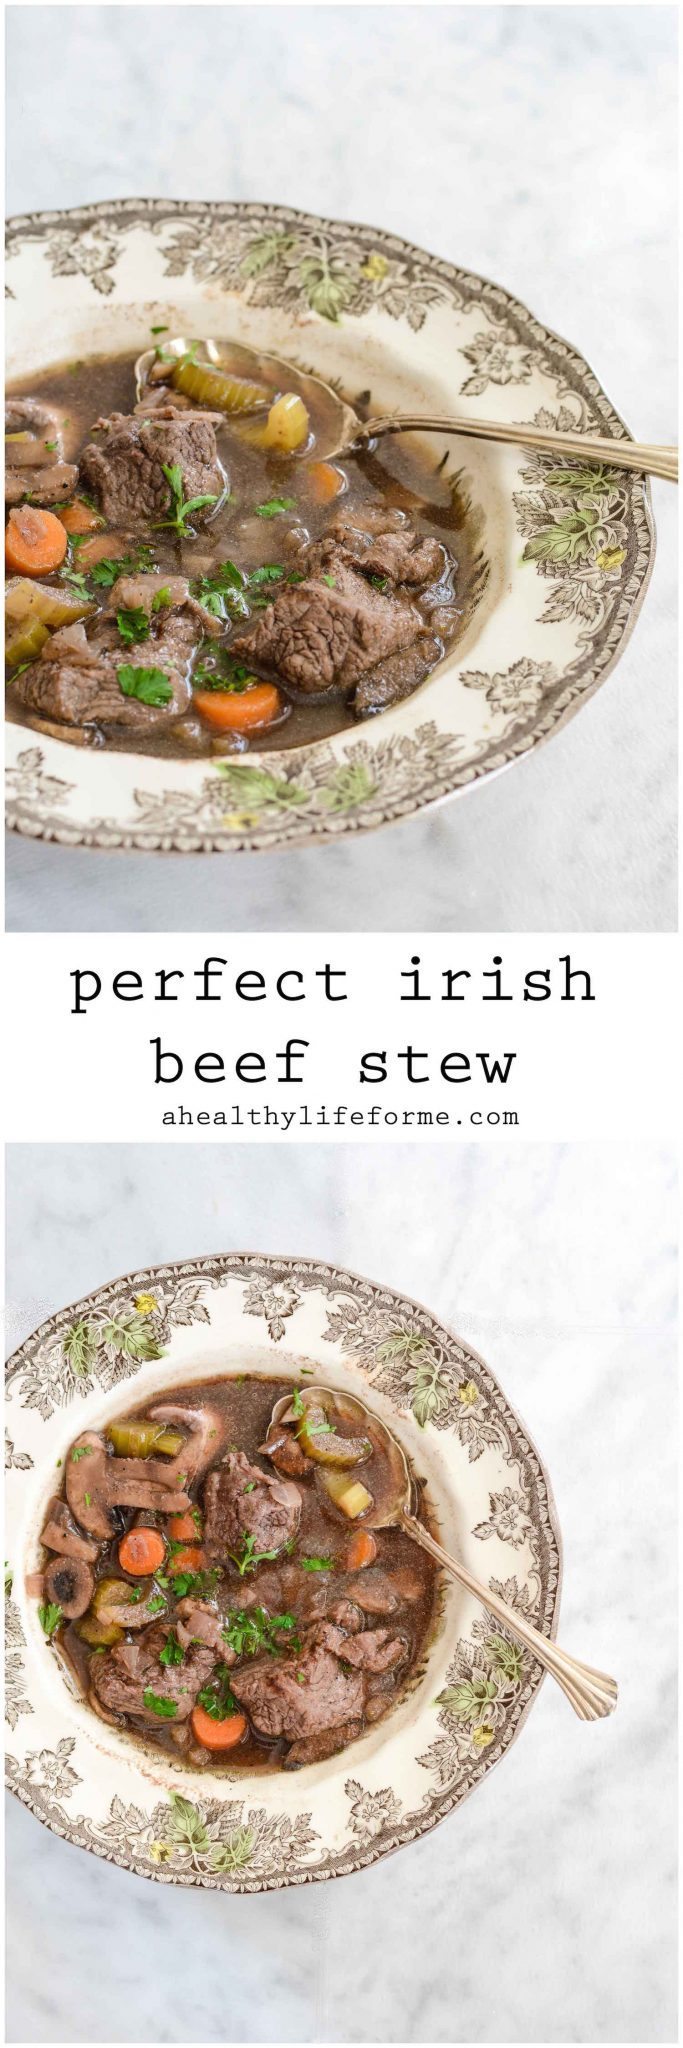 Irish Beef Stew Healthy and Clean Recipe | ahealthylifeforme.com